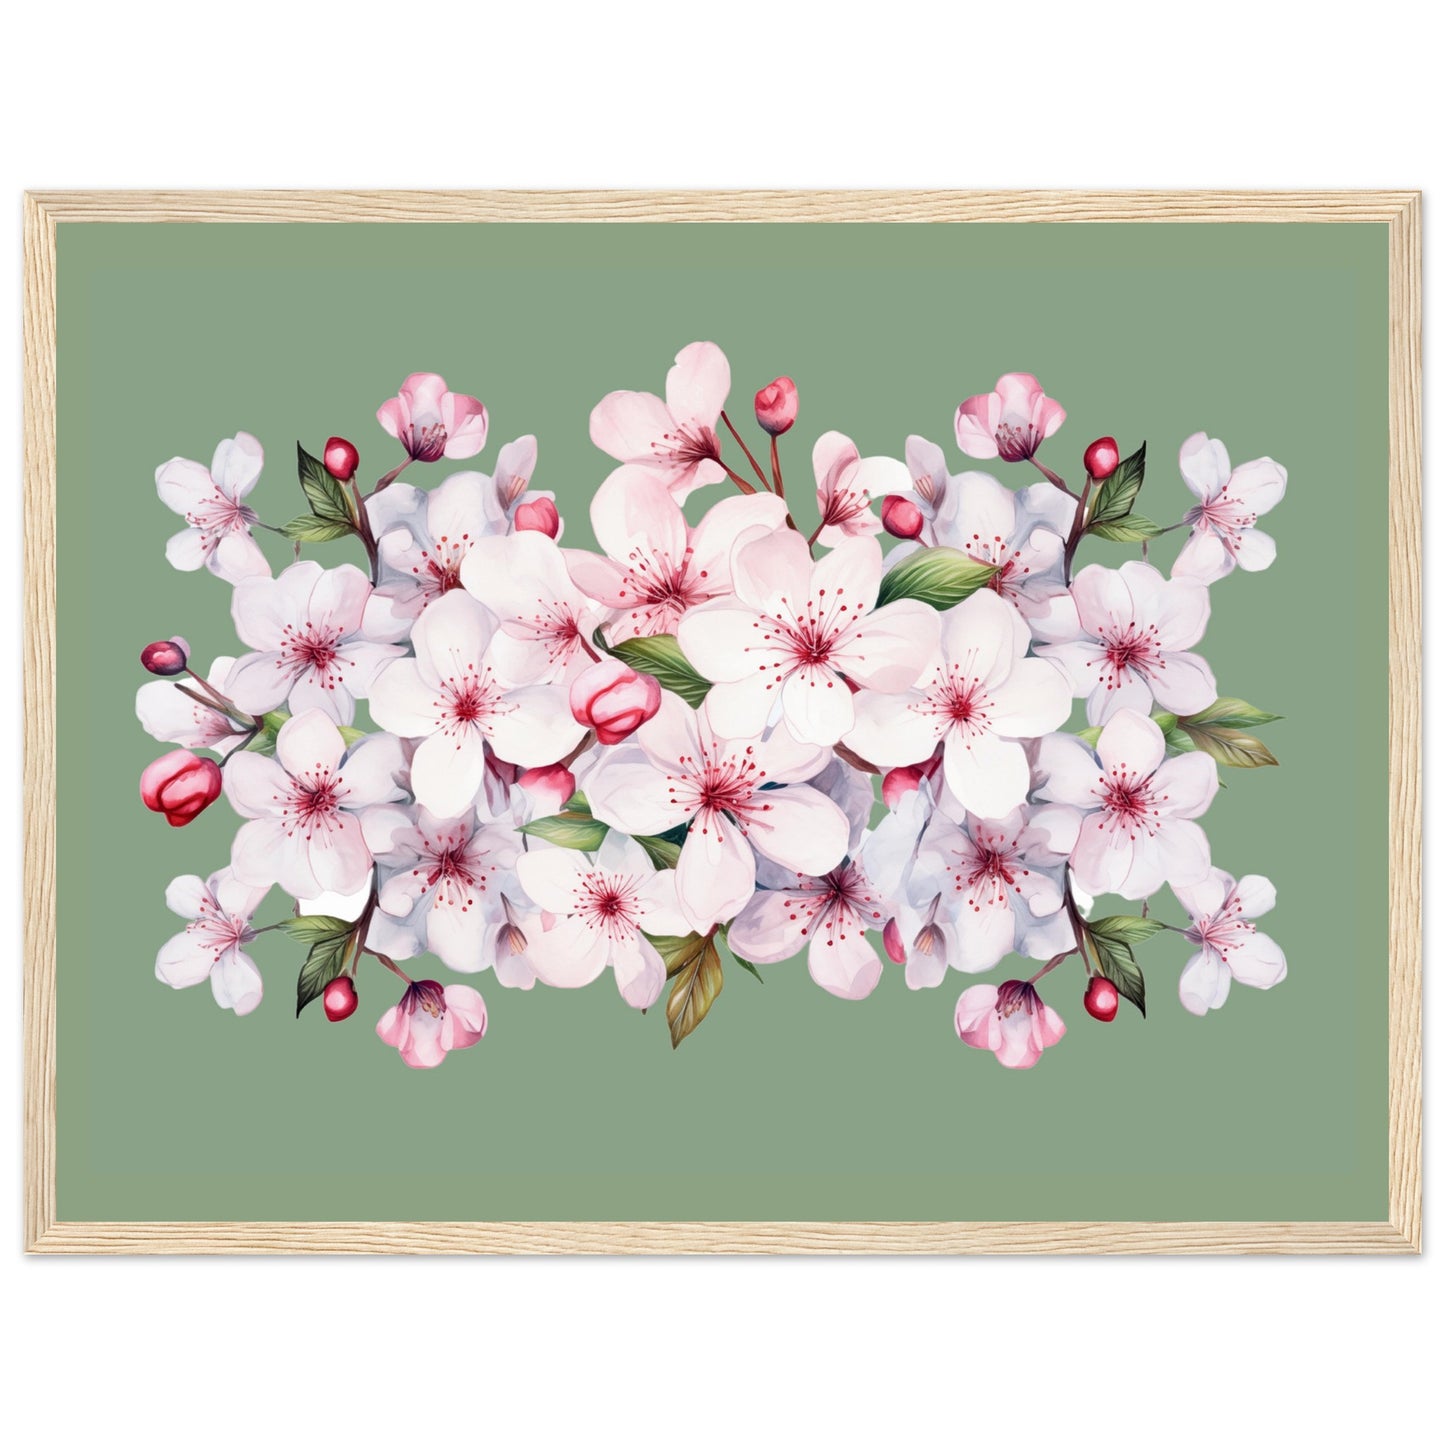 CHERRY BLOSSOMS No. 3 in GREEN Background - Premium Matte Paper Wooden Framed Poster